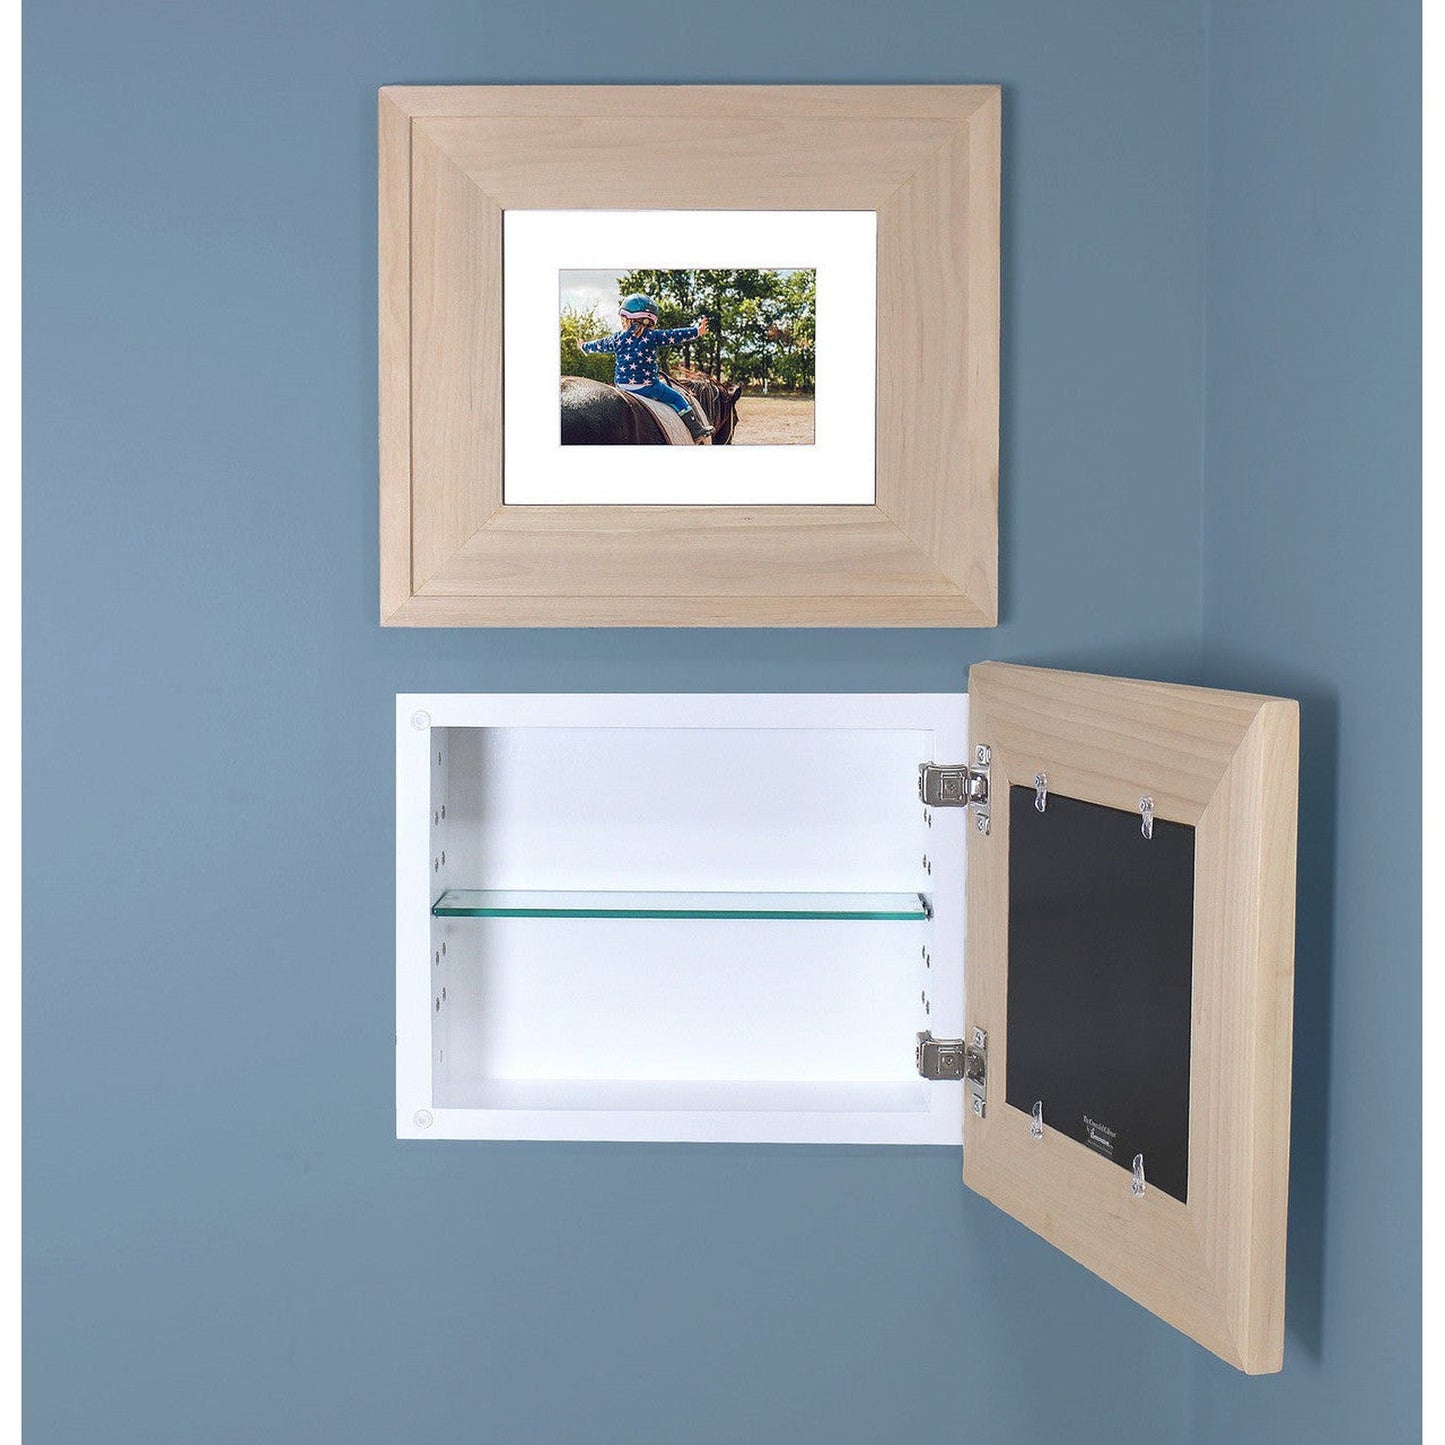 Fox Hollow Furnishings 14" x 11" Unfinished Raised Edge Compact Landscape Special 3" Depth Recessed Picture Frame Medicine Cabinet With Mirror and White Matting